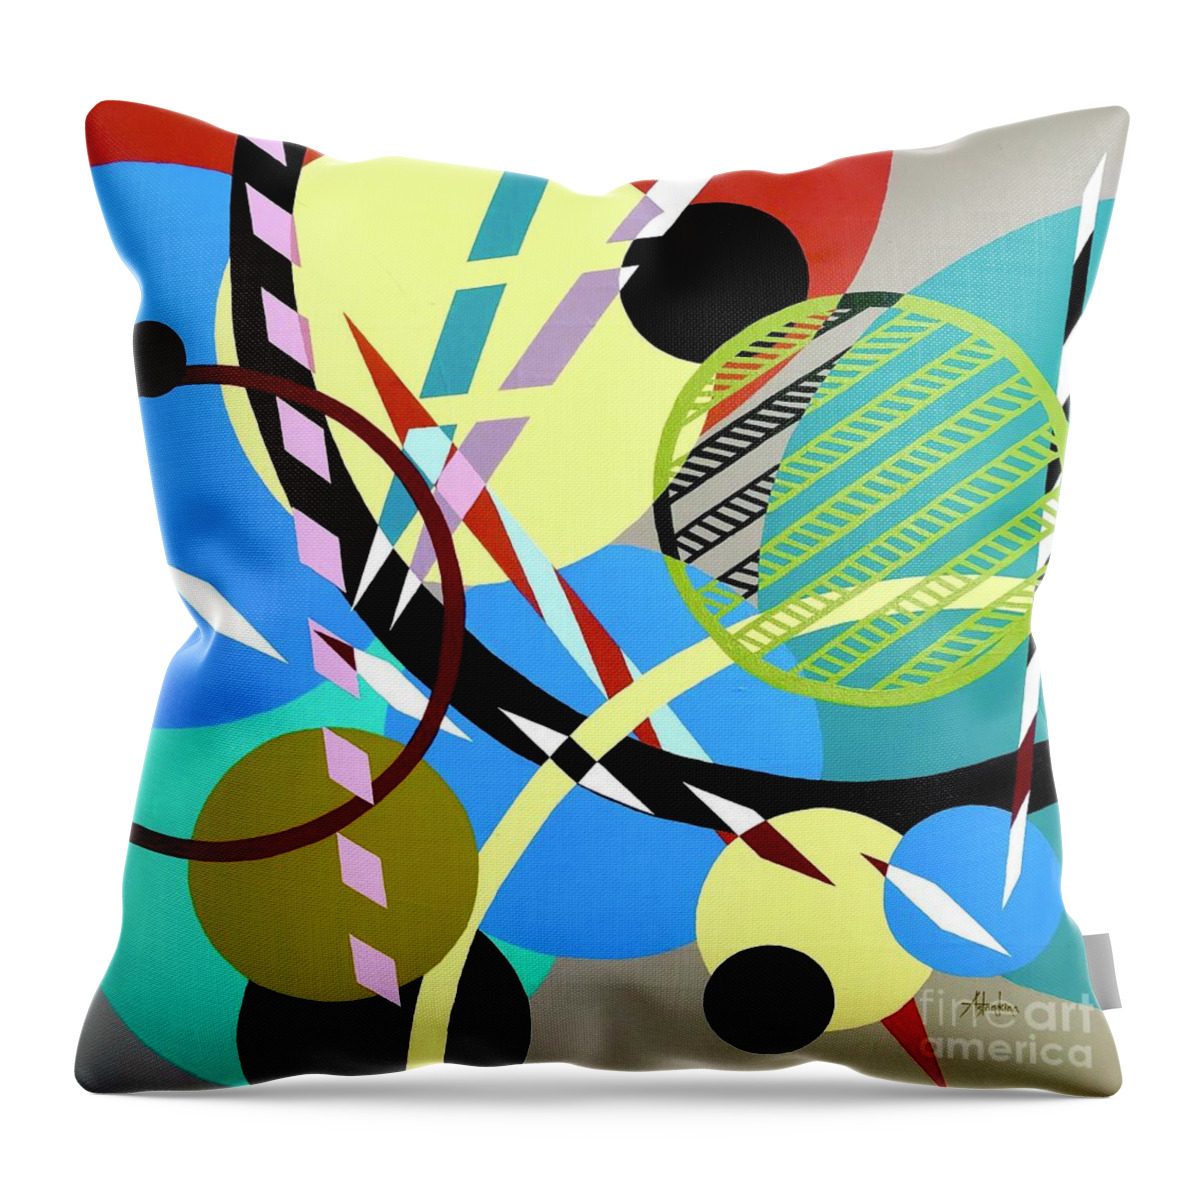 Kandinsky Throw Pillow featuring the painting Composition #21 by Natalia Astankina